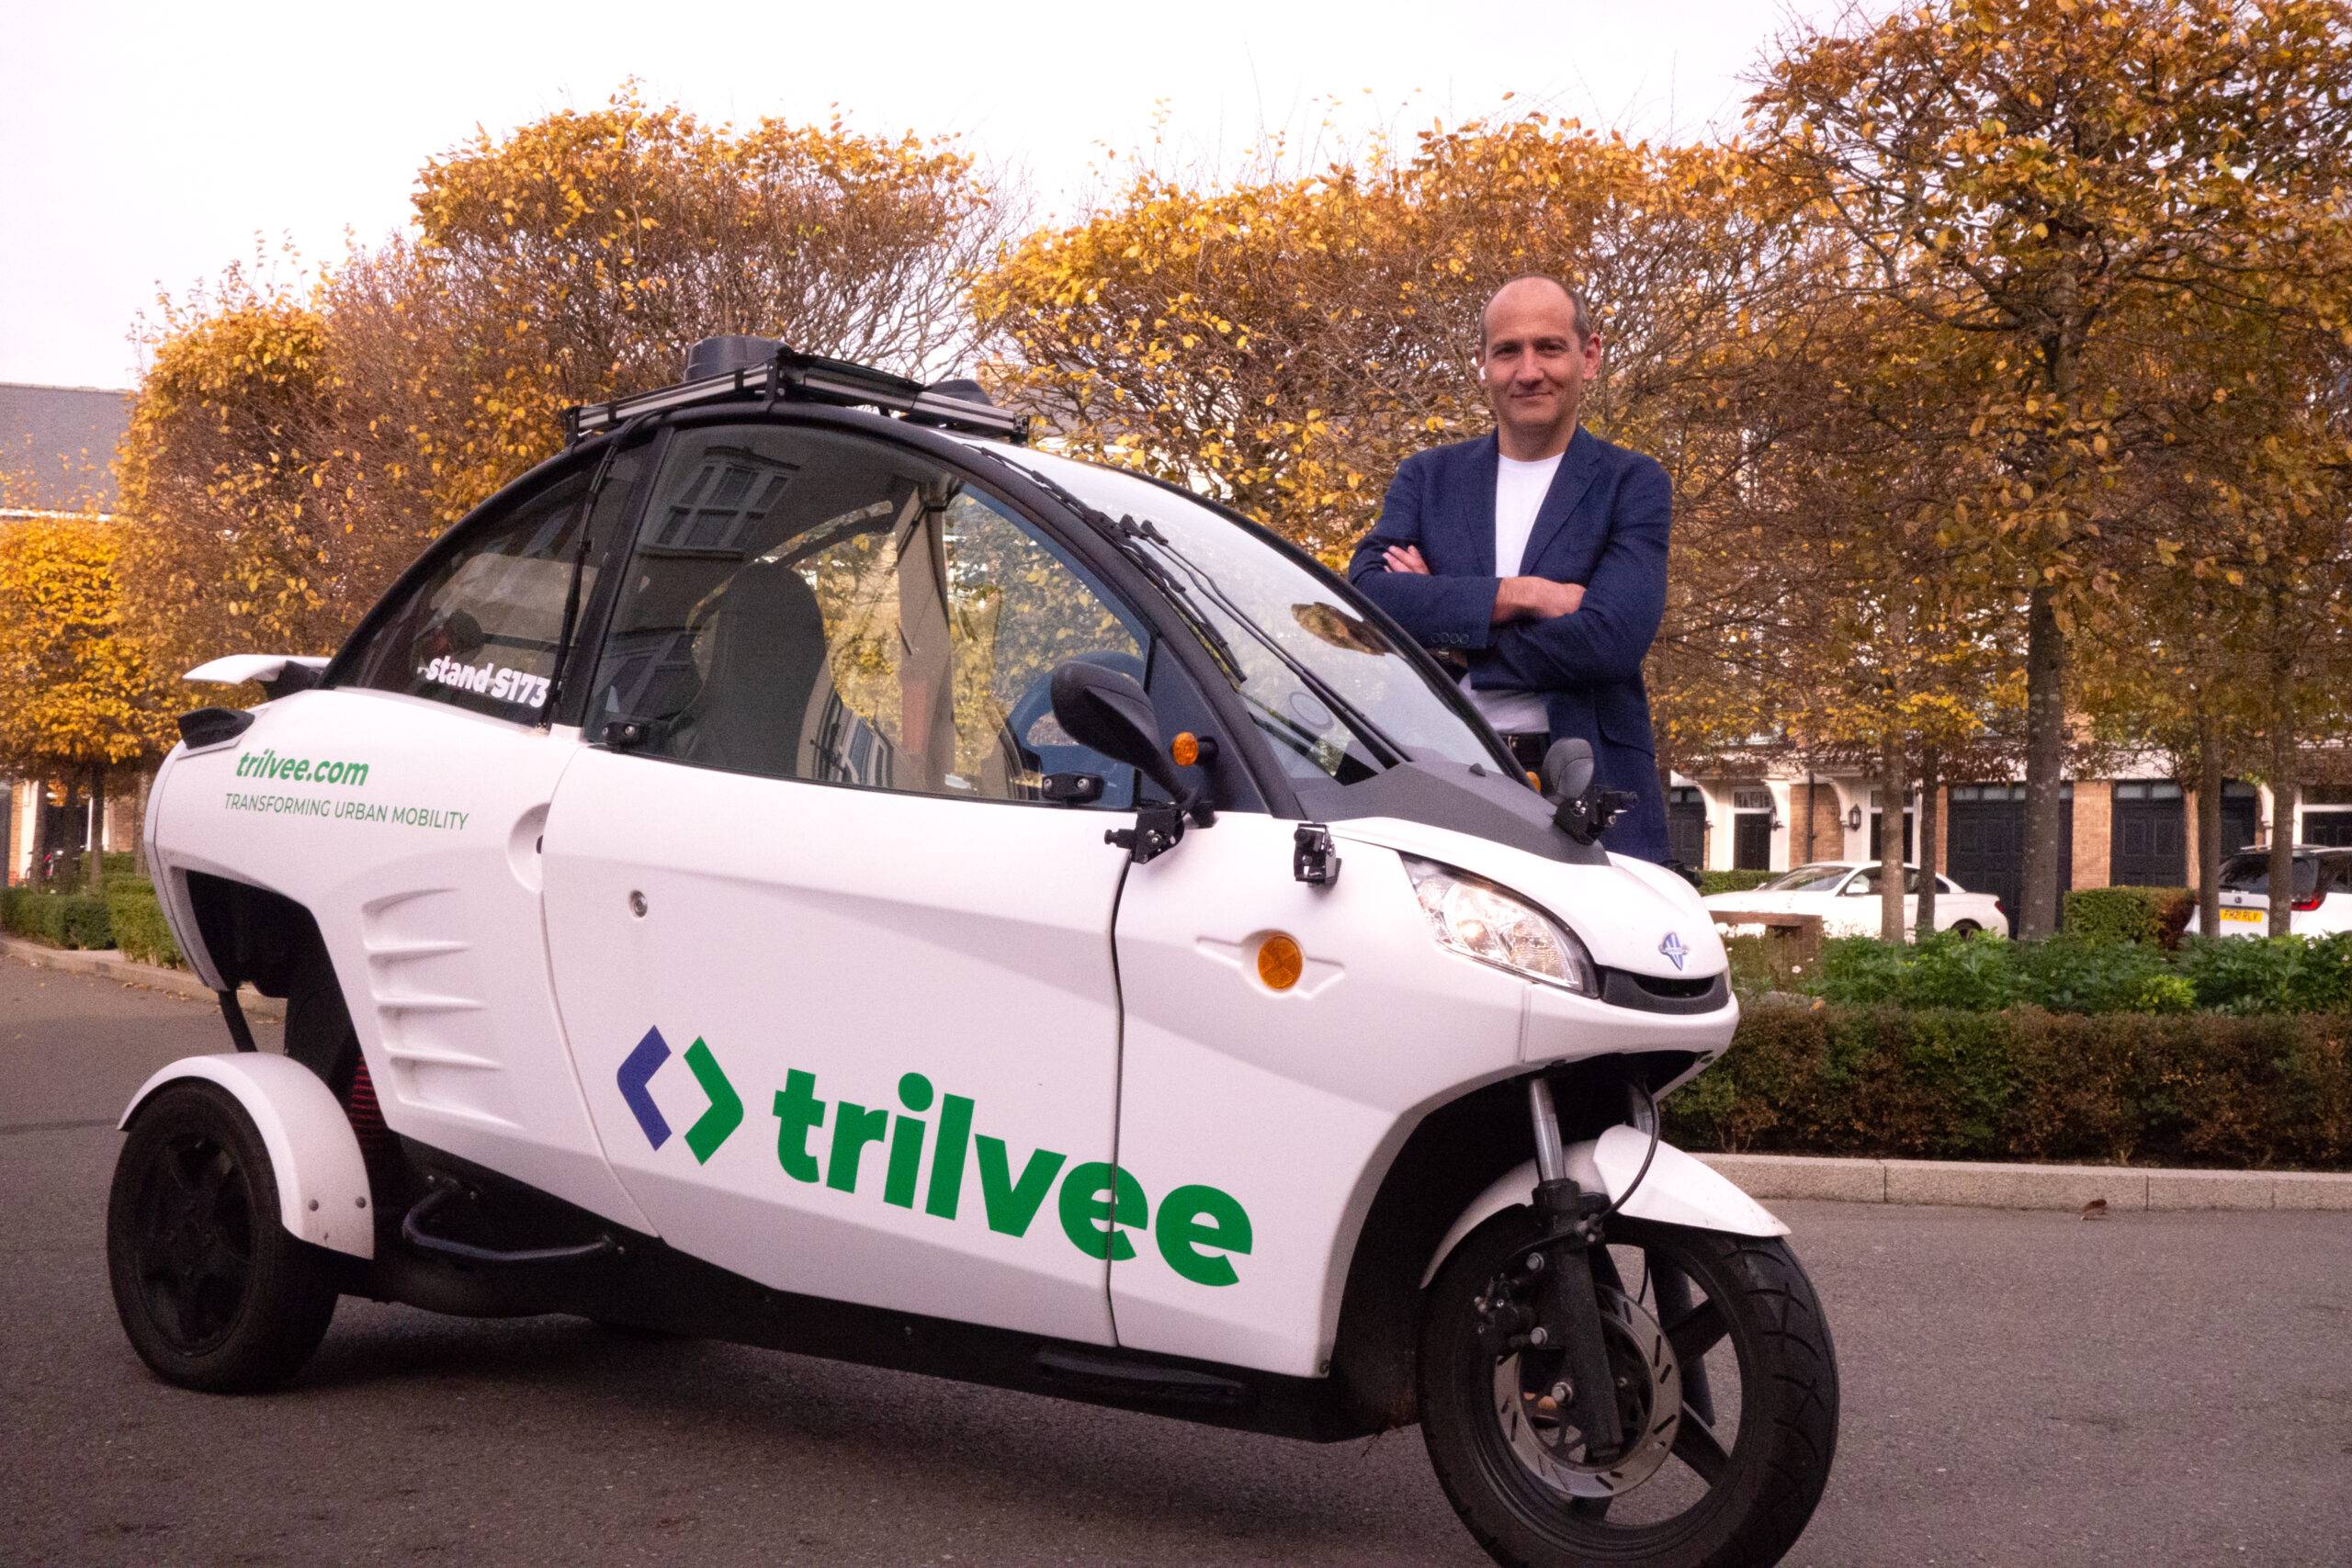 Meet Trilvee, the startup that can deliver the optimised vehicle for every trip